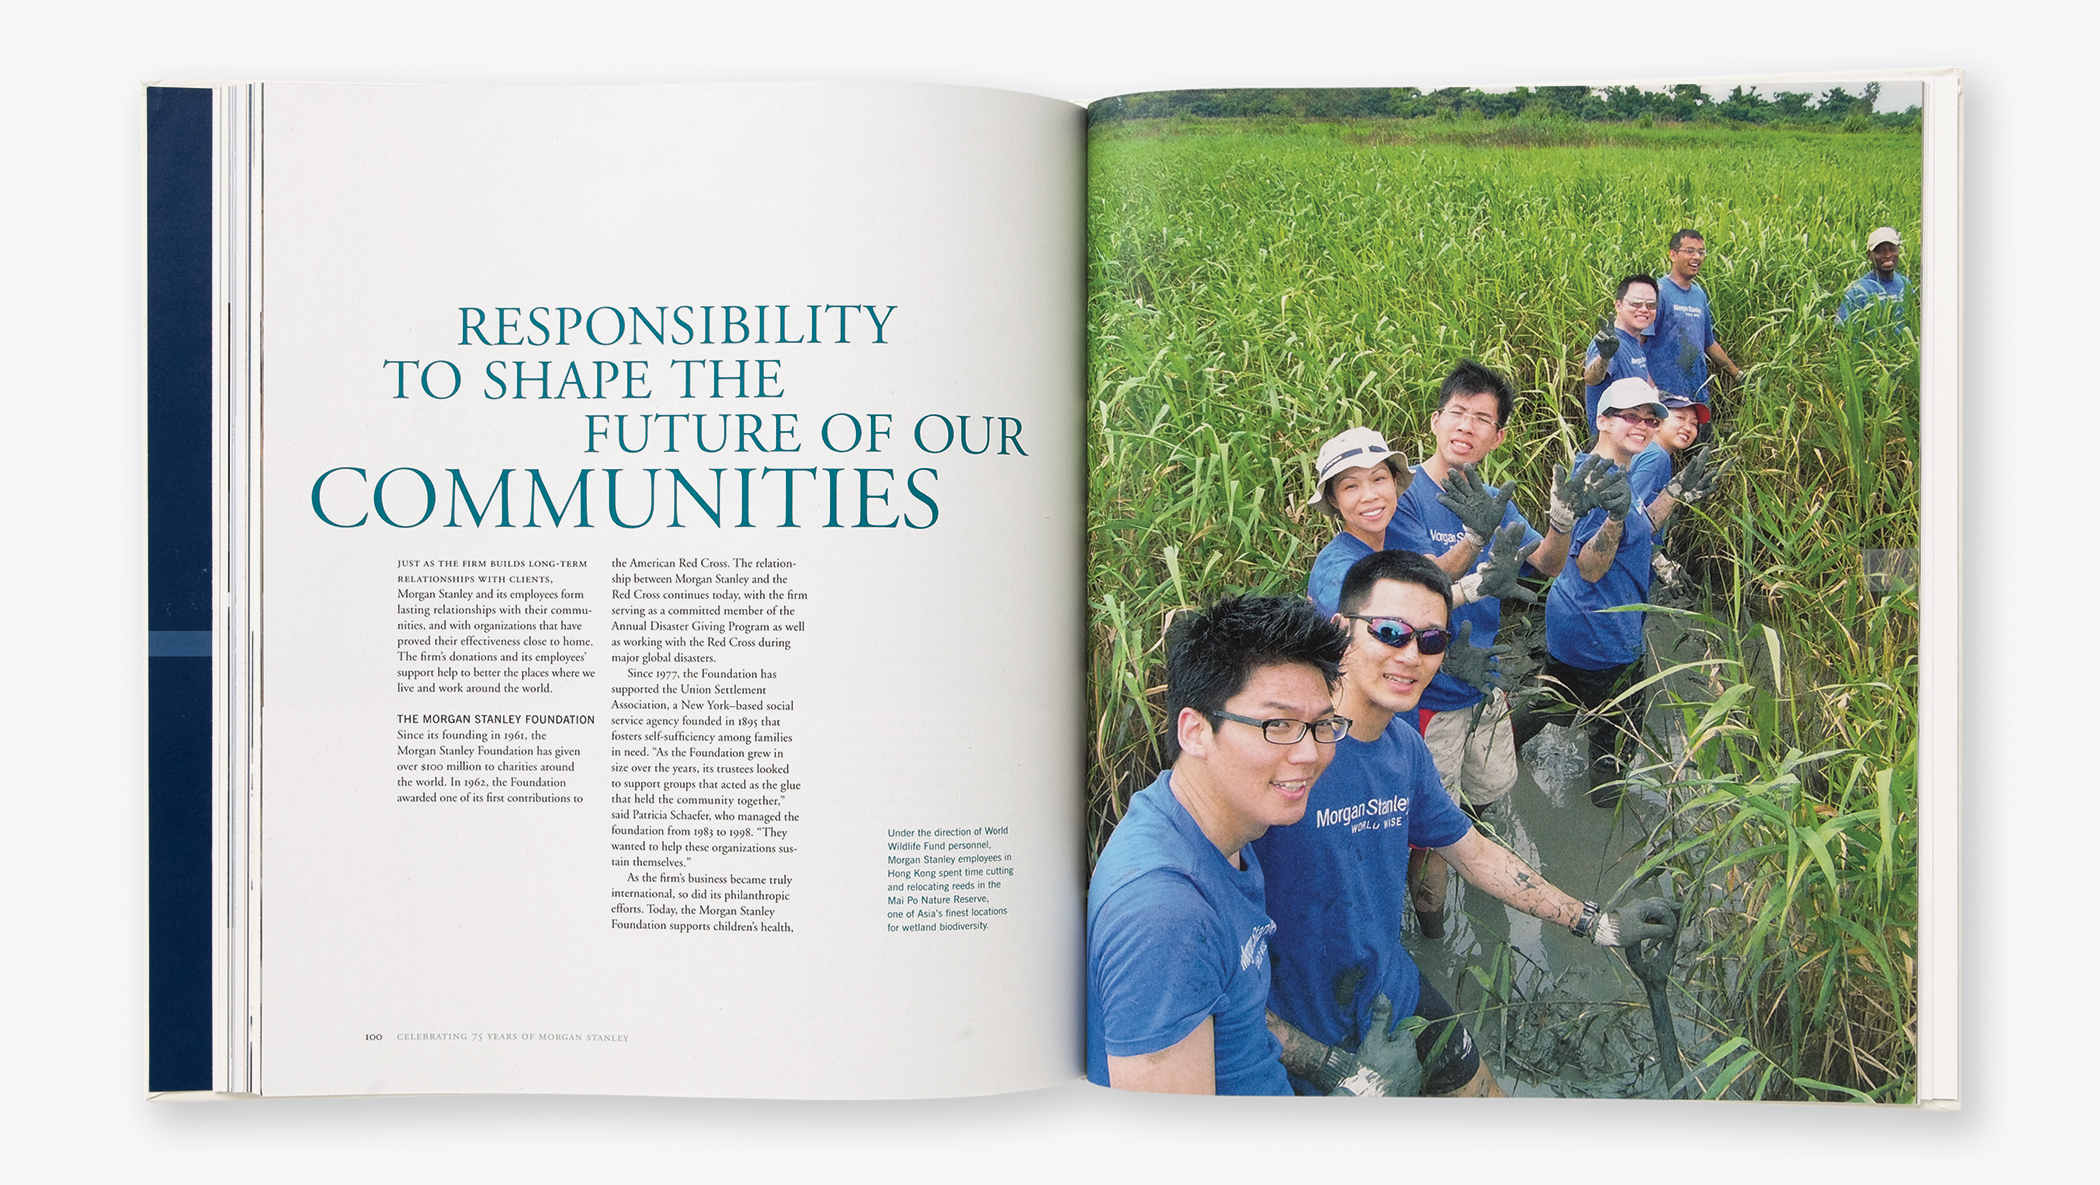 Morgan Stanley staff doing volunteer work in a green field from the Morgan Stanley 75th anniversary commemorative book.